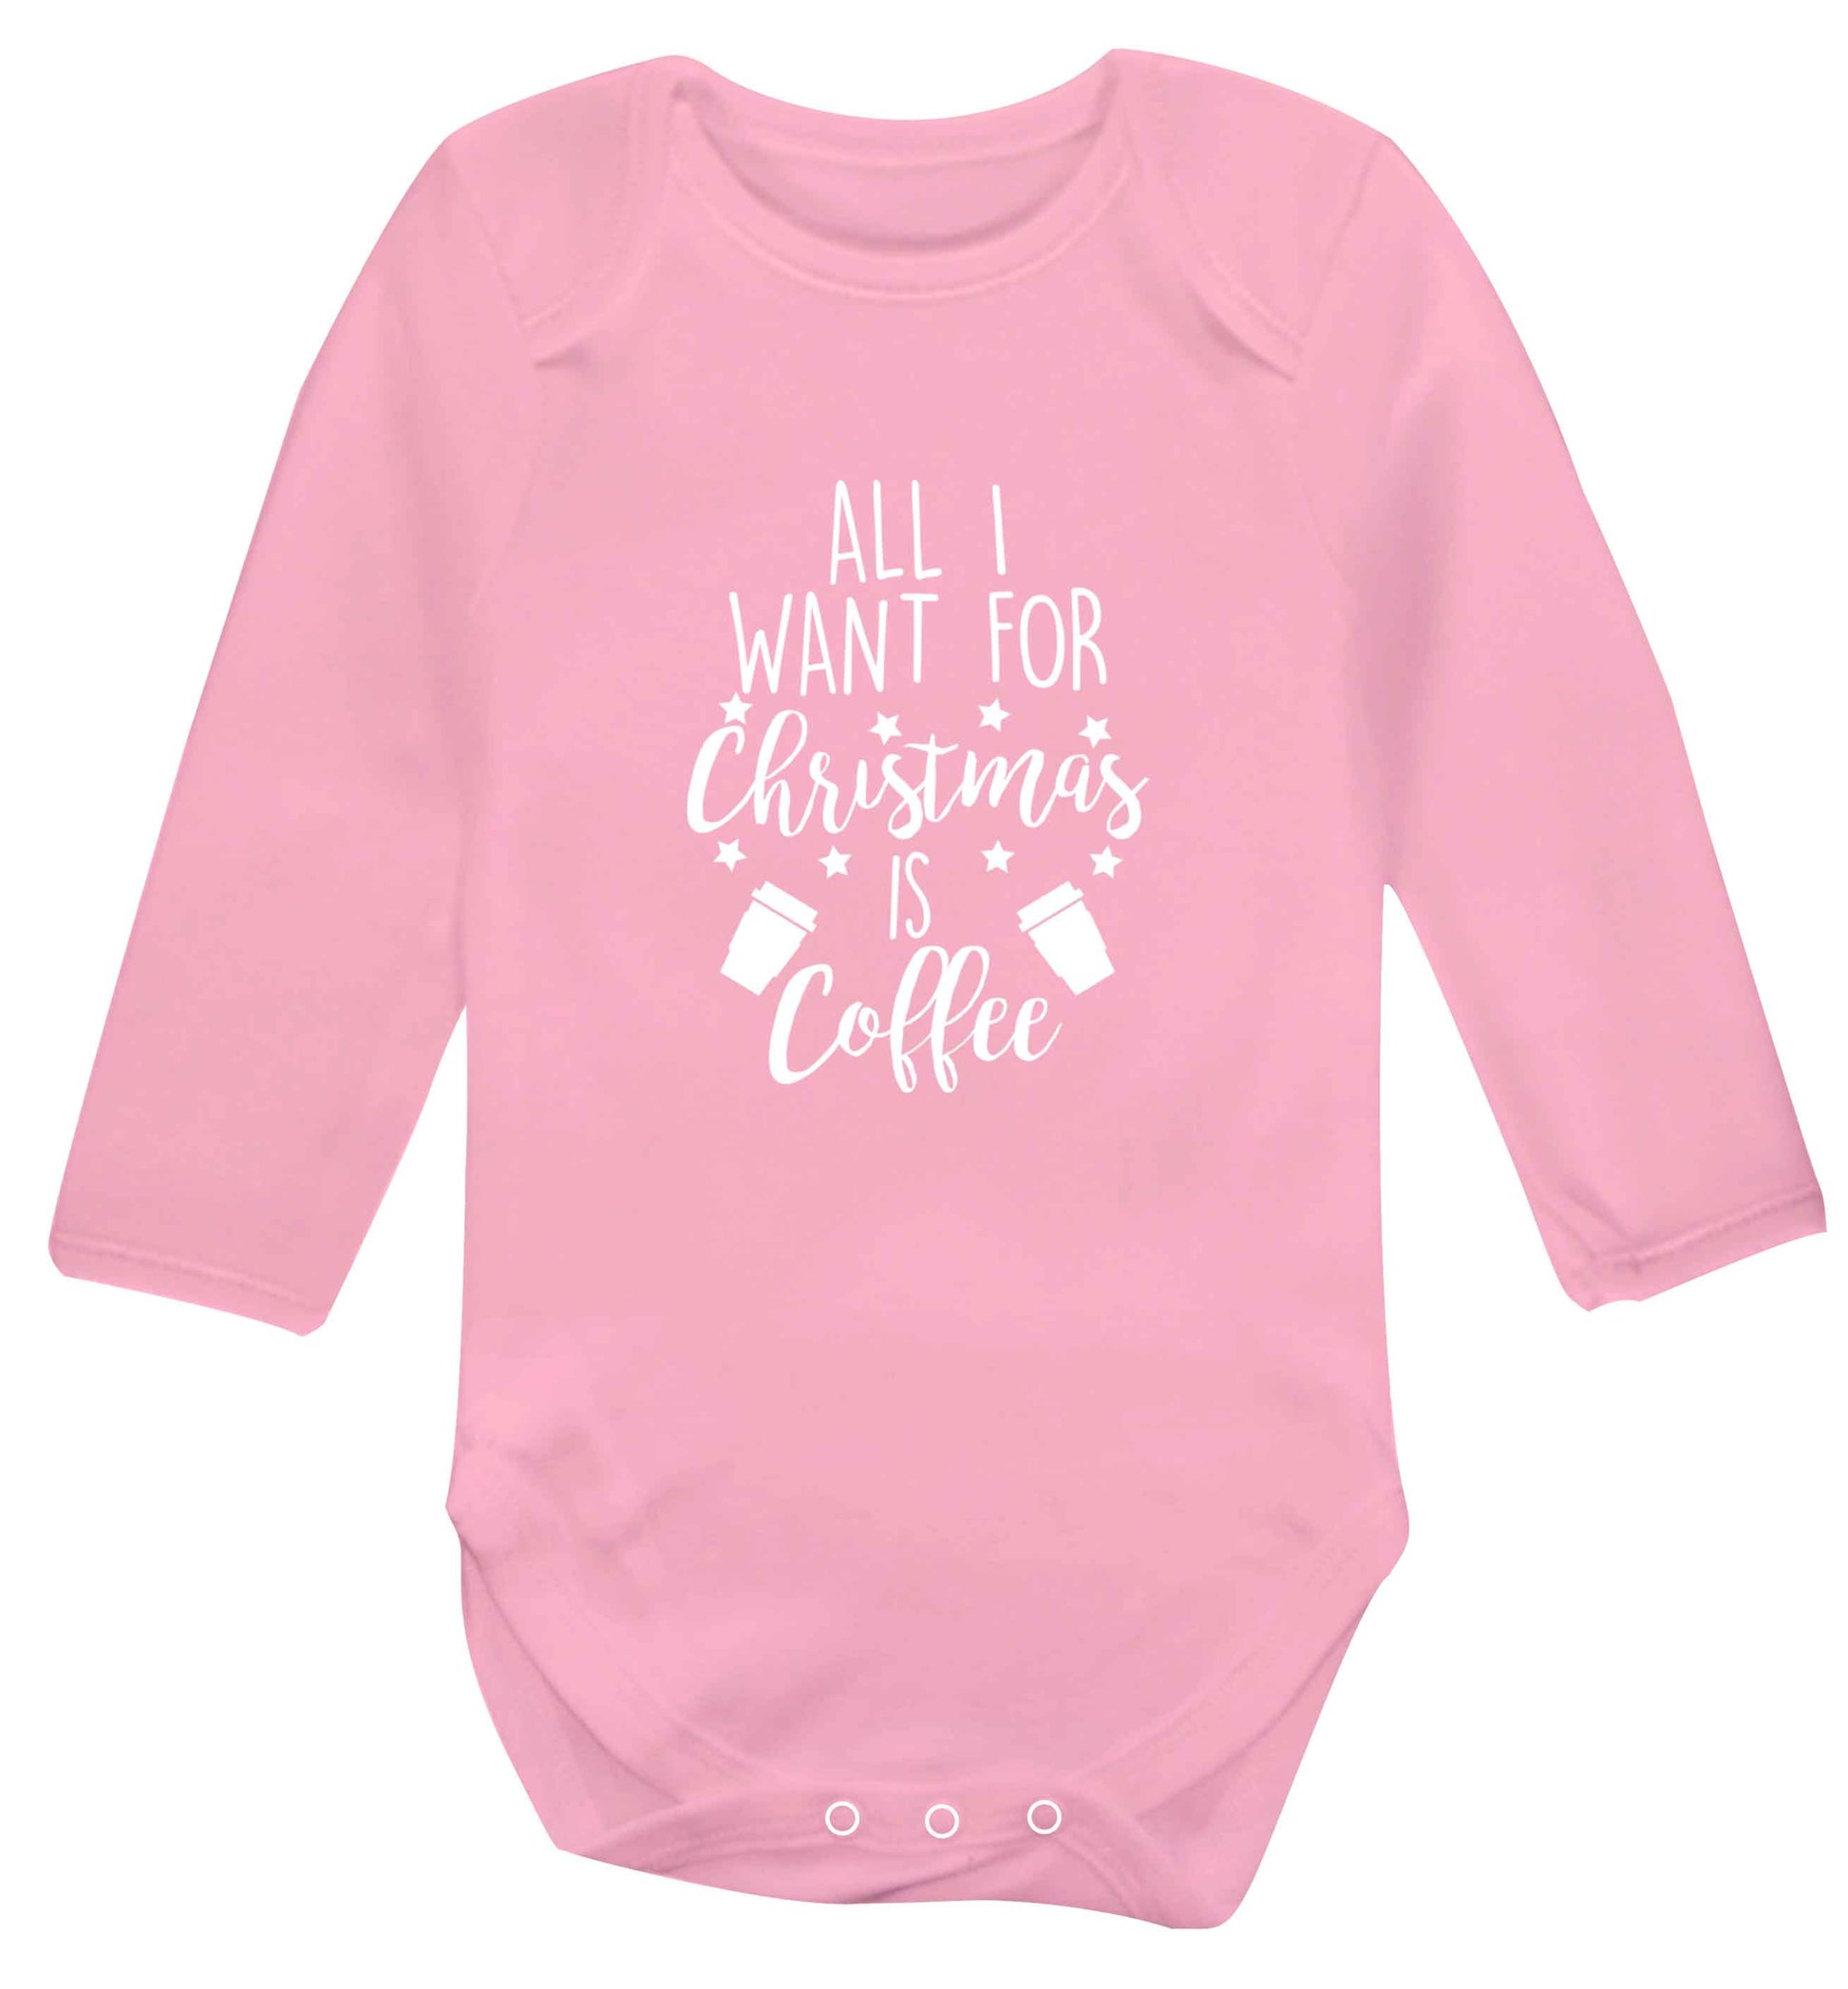 All I want for Christmas is coffee Baby Vest long sleeved pale pink 6-12 months